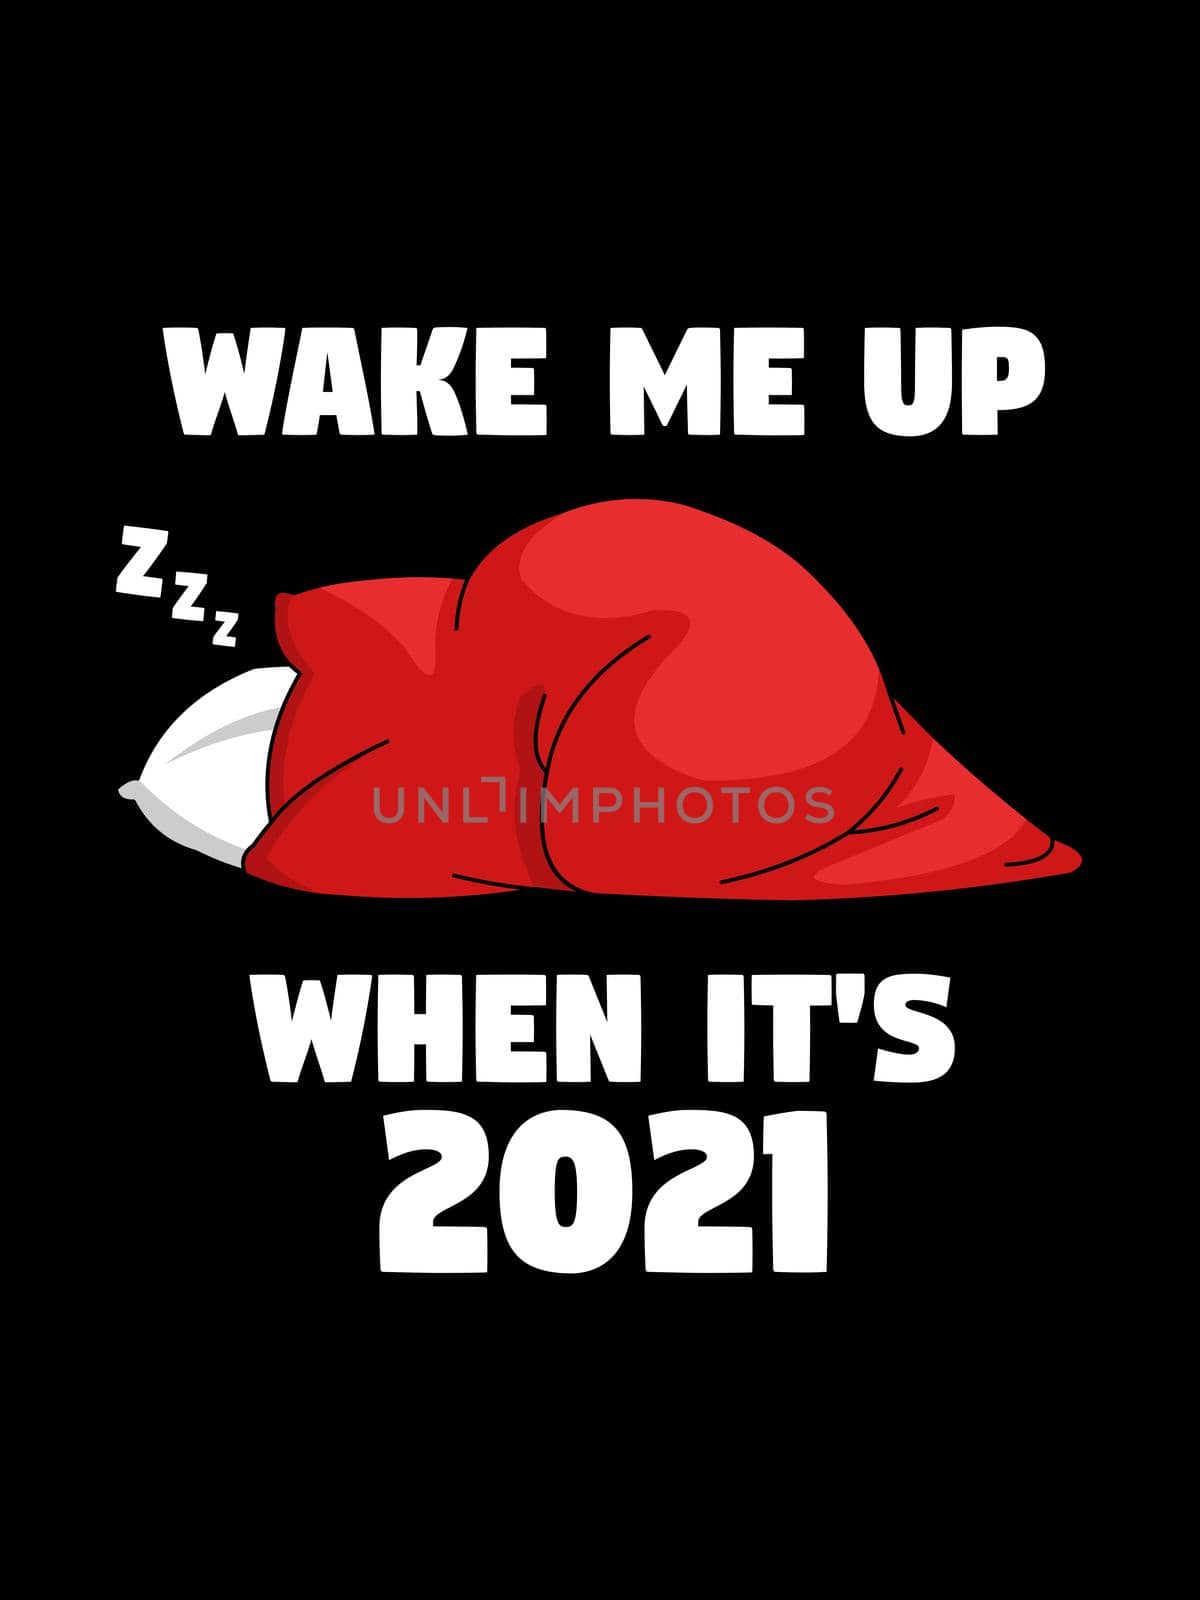 Wake me up when it's 2021 by Bigalbaloo